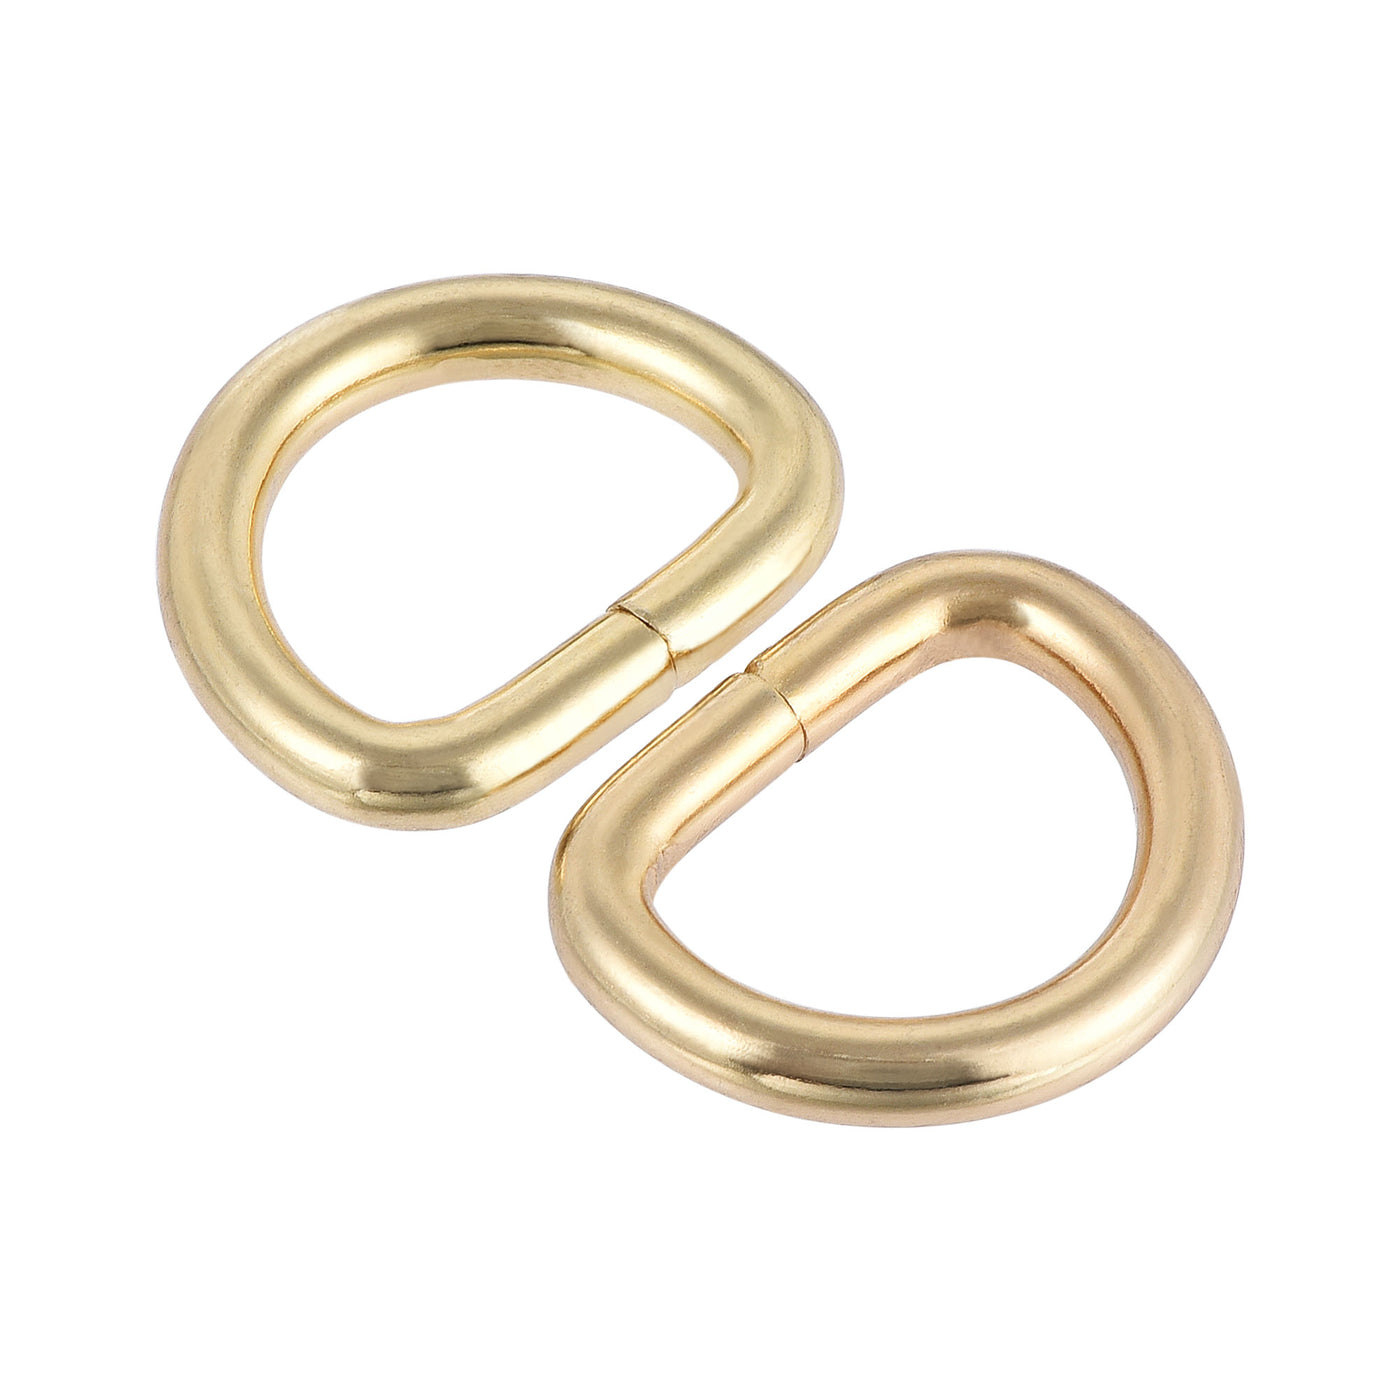 uxcell Uxcell Metal D Ring 0.63"(16mm) D-Rings Buckle for Hardware Bags Belts Craft DIY Accessories Gold Tone 100pcs